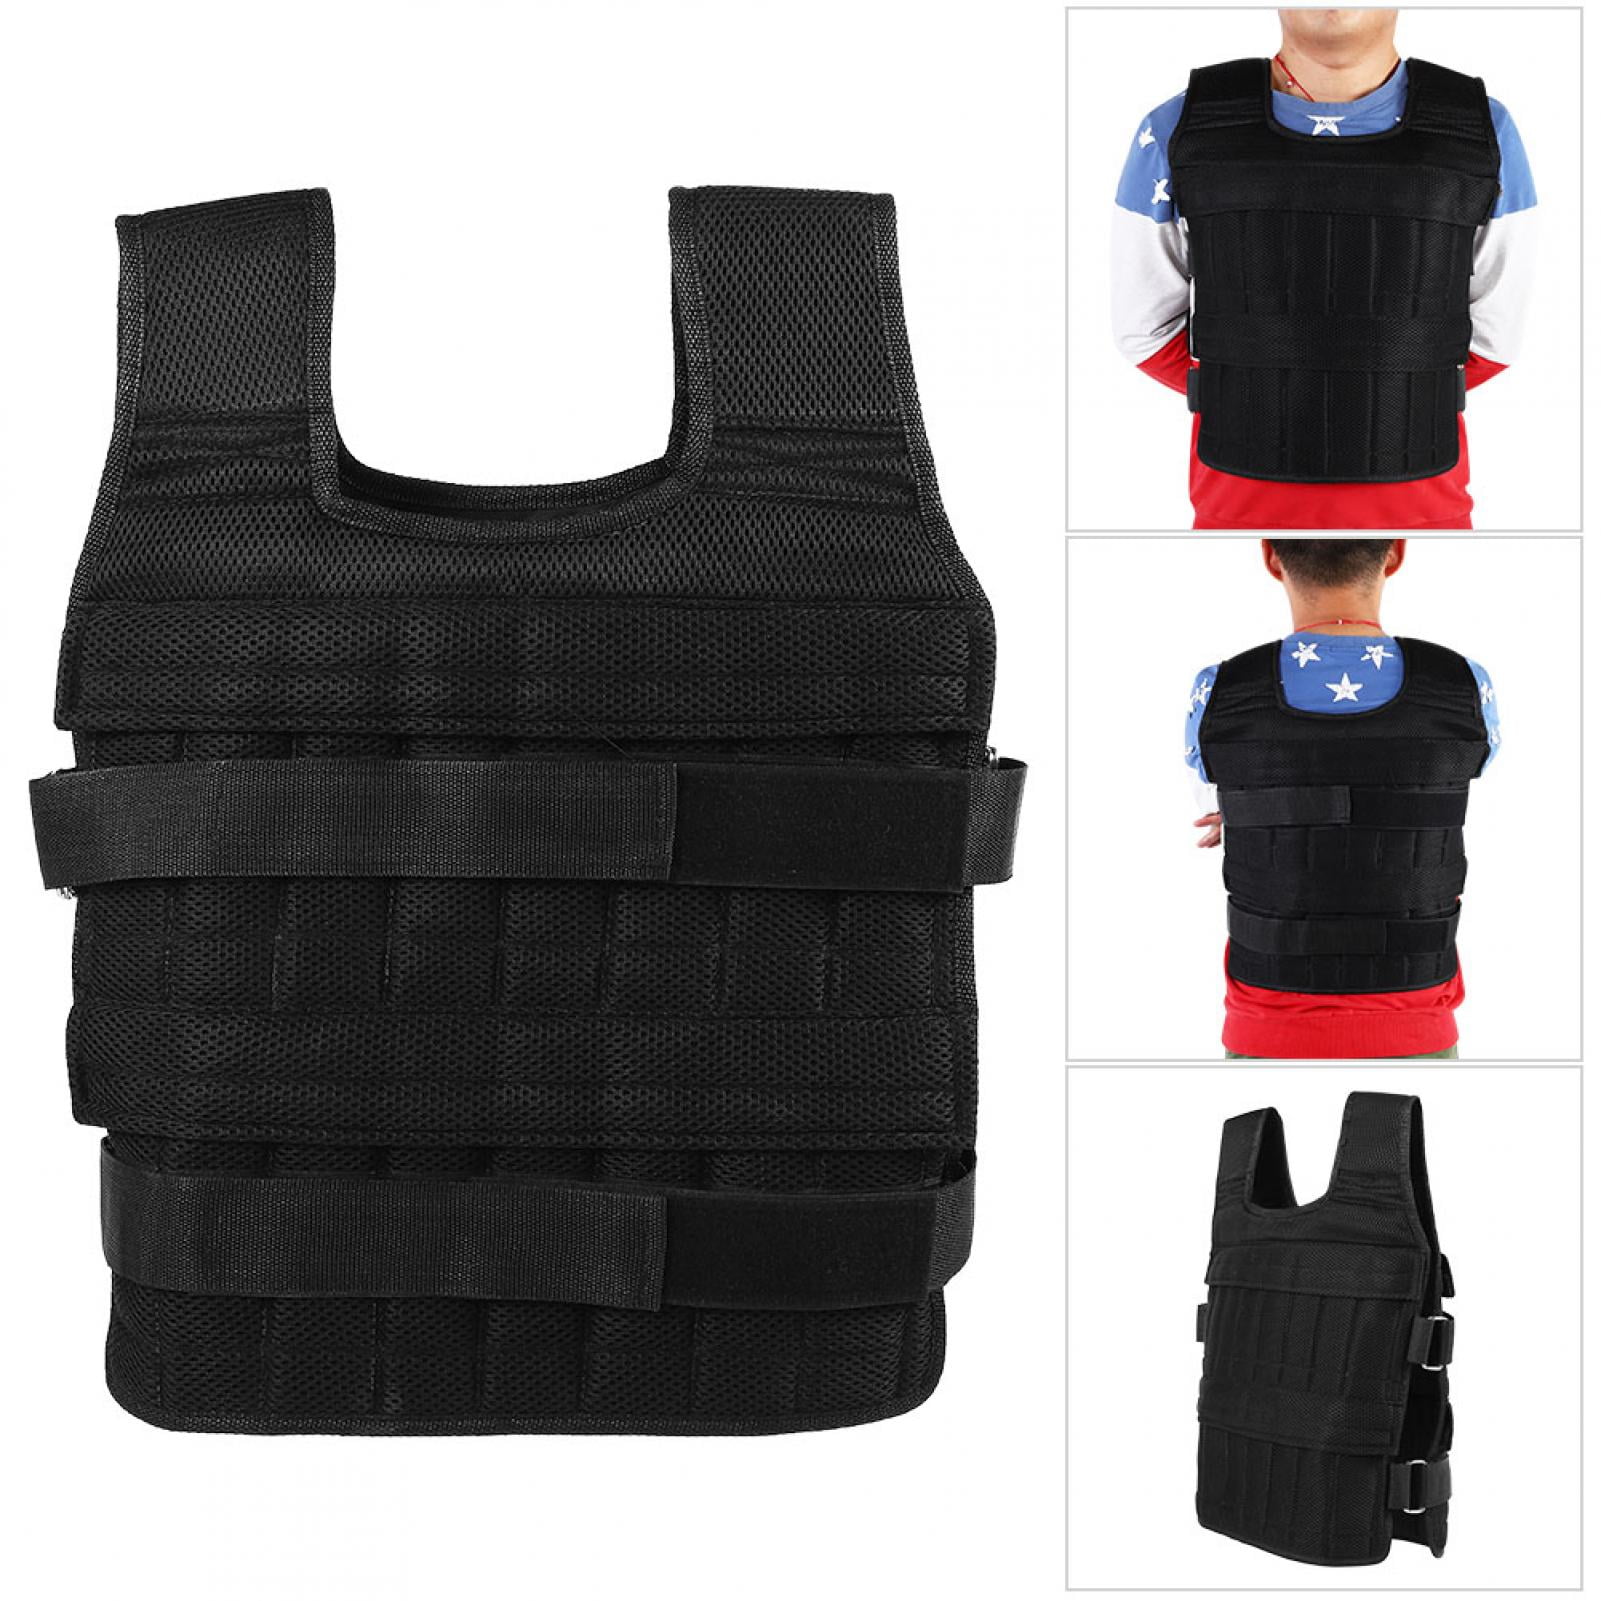 Oxford Cloth Breathable Exercise Strength Training Adjustable Weighted Vest 